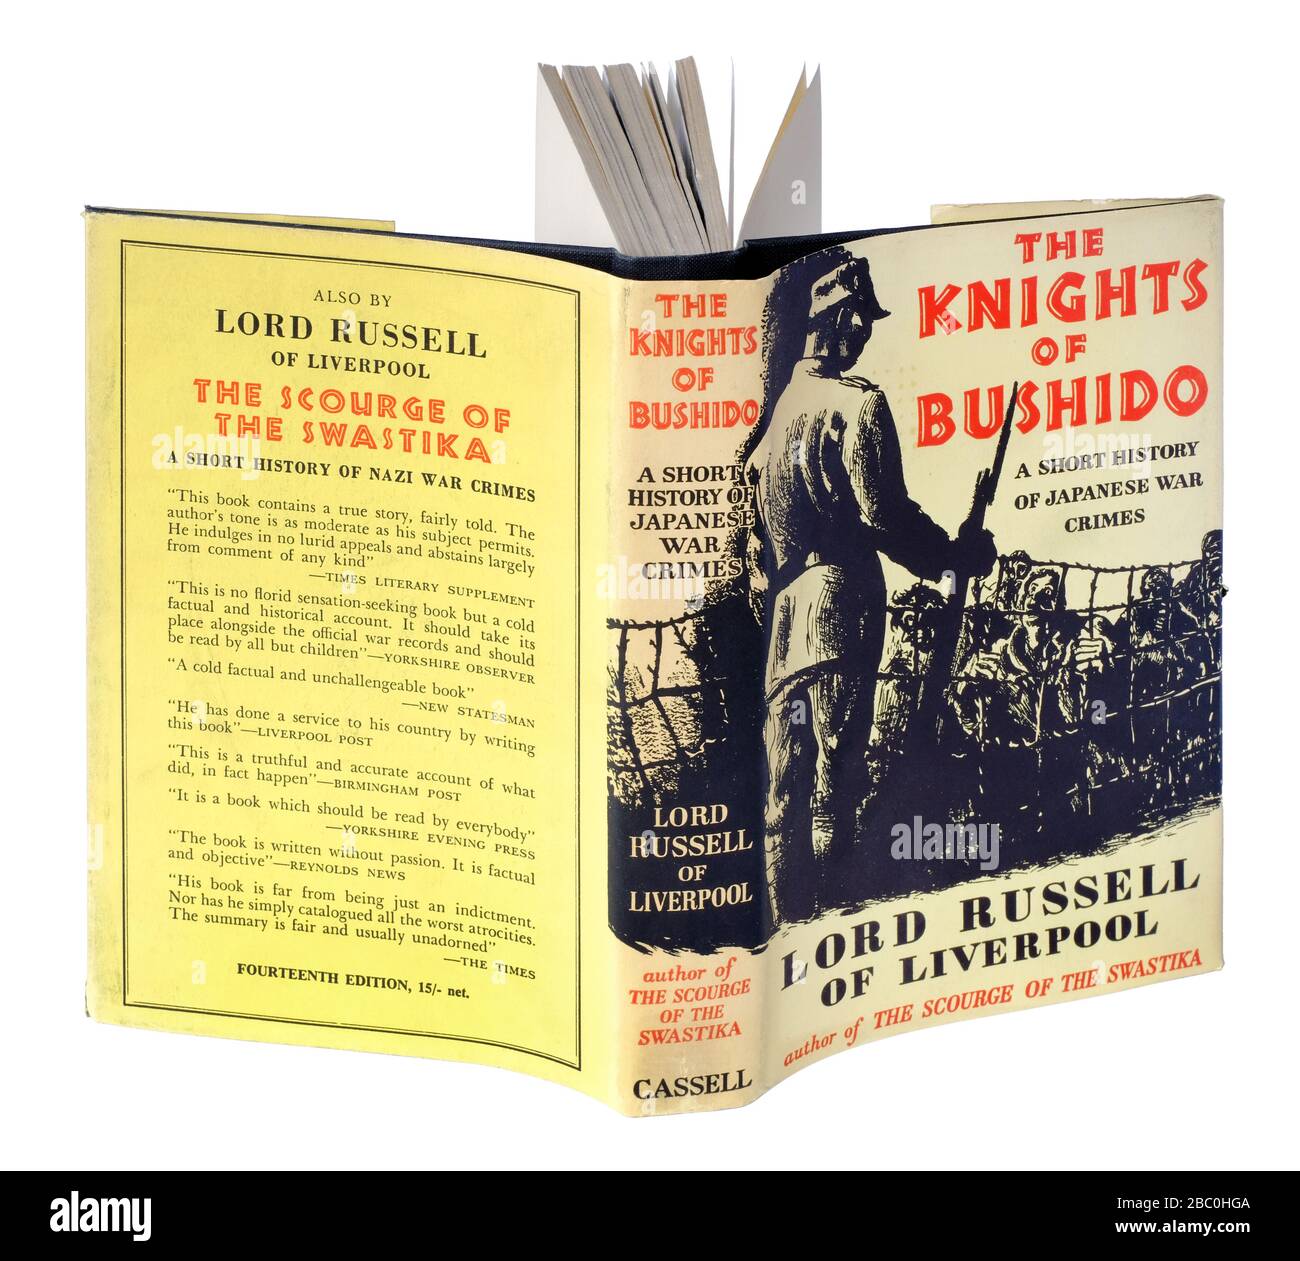 'The Knights of Bushido, a Short History of Japanese War Crimes' by Lord Russell of Liverpool (1958) Stock Photo